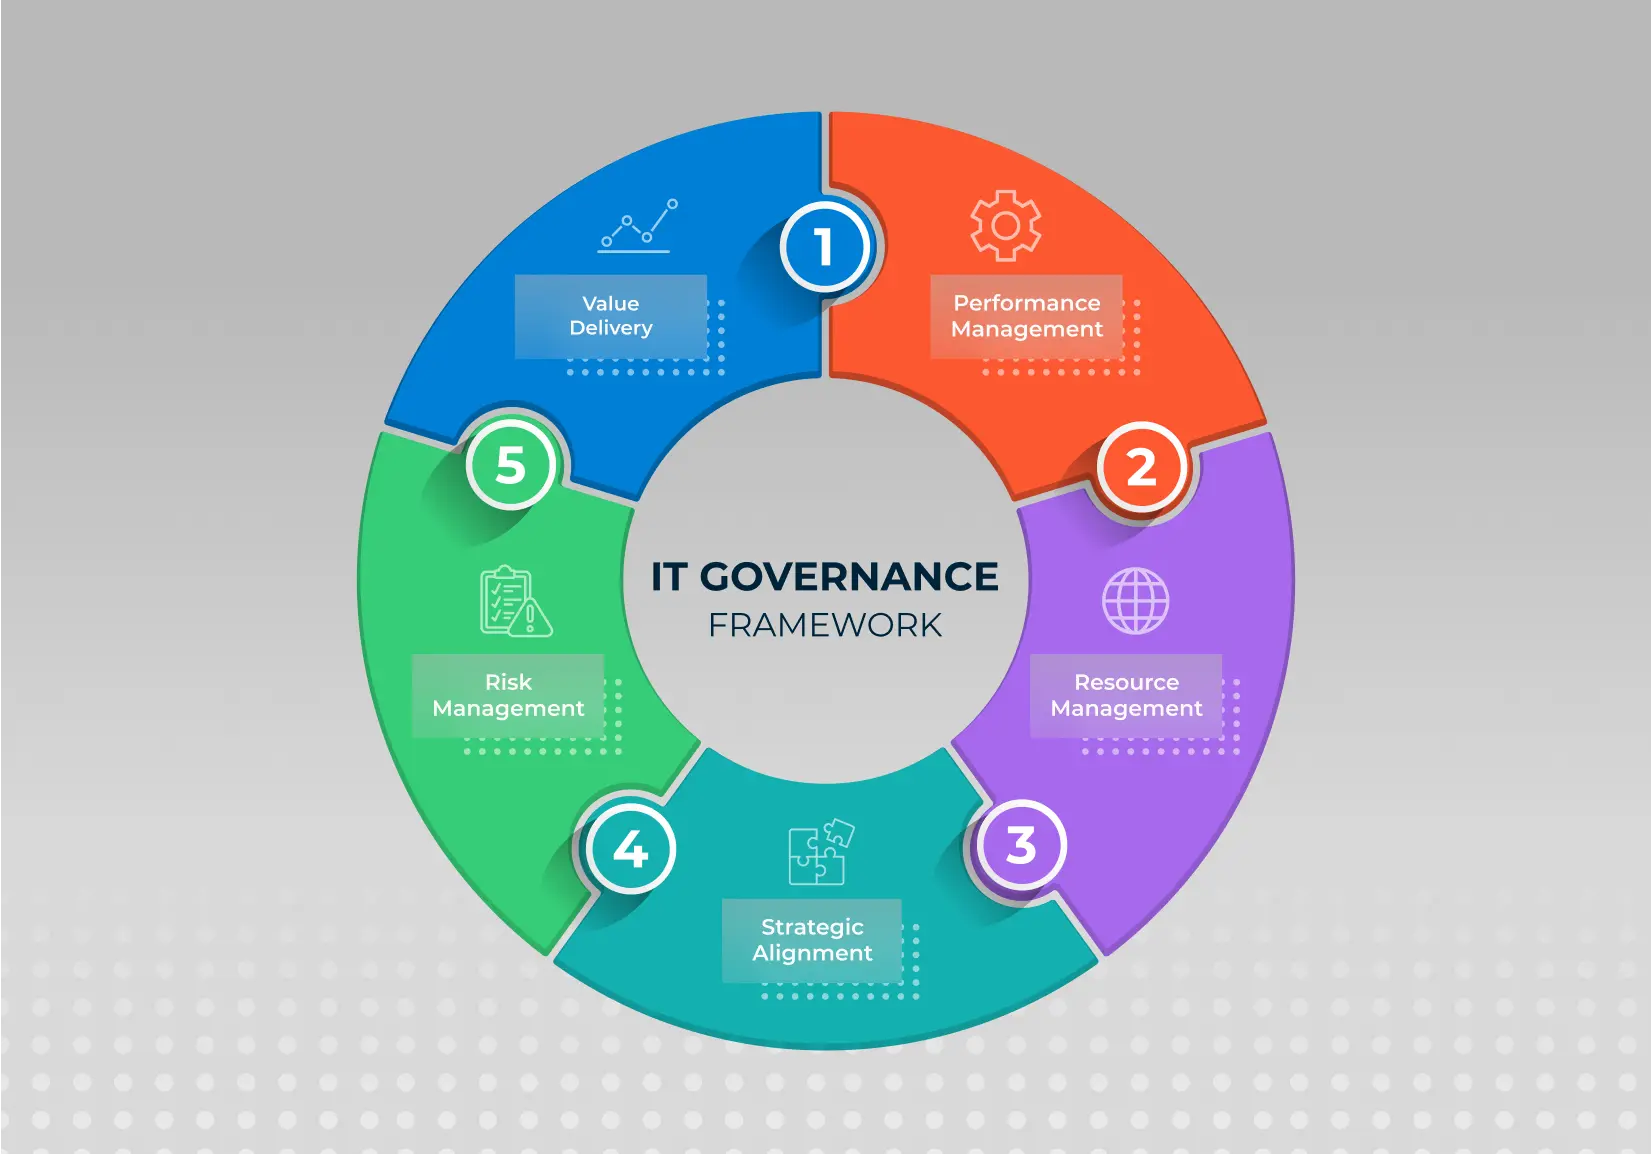 The 5 domains of IT Governance